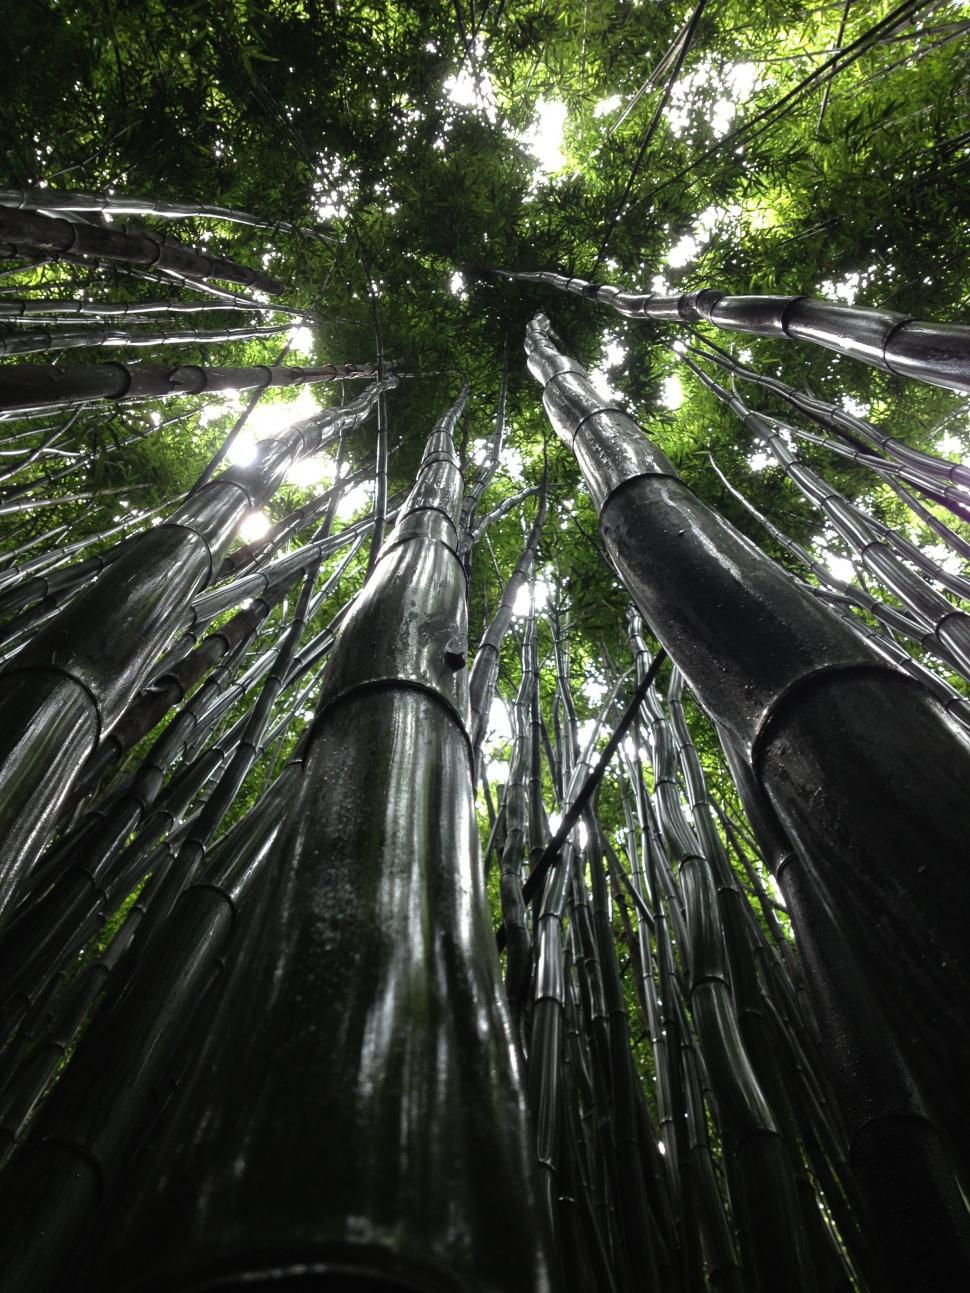 Free Image of Looking Up at a Tall Bamboo Tree in a Forest 